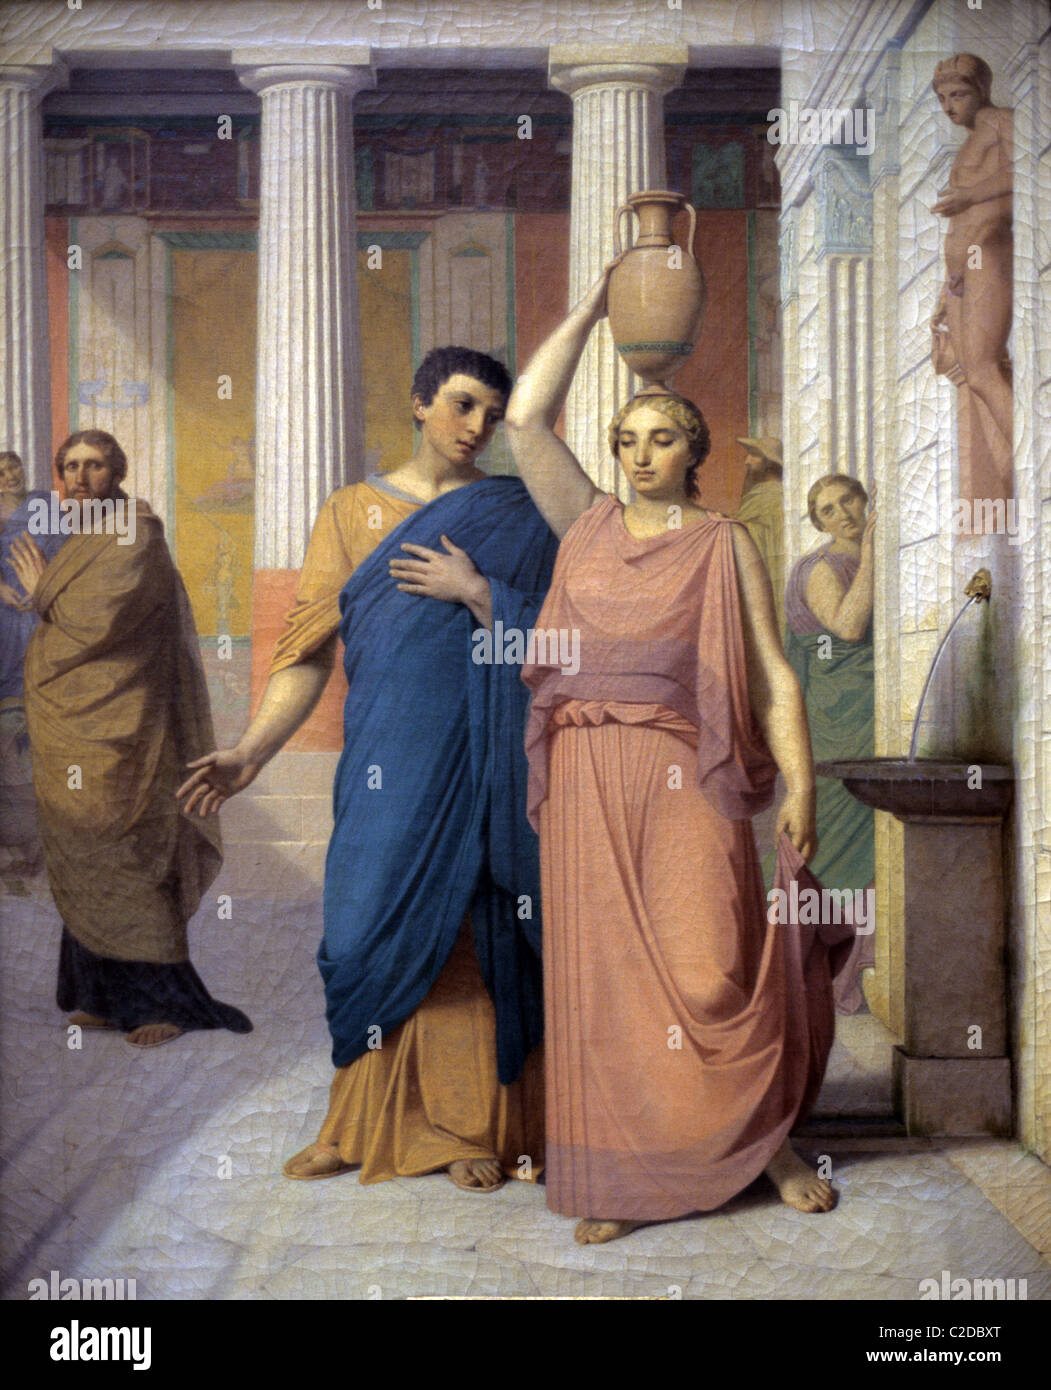 Daily Life in Ancient Rome or Domestic Scene, Romans Wearing Togas in Roman Villa, c19th Painting by Jacques Pilliard Stock Photo